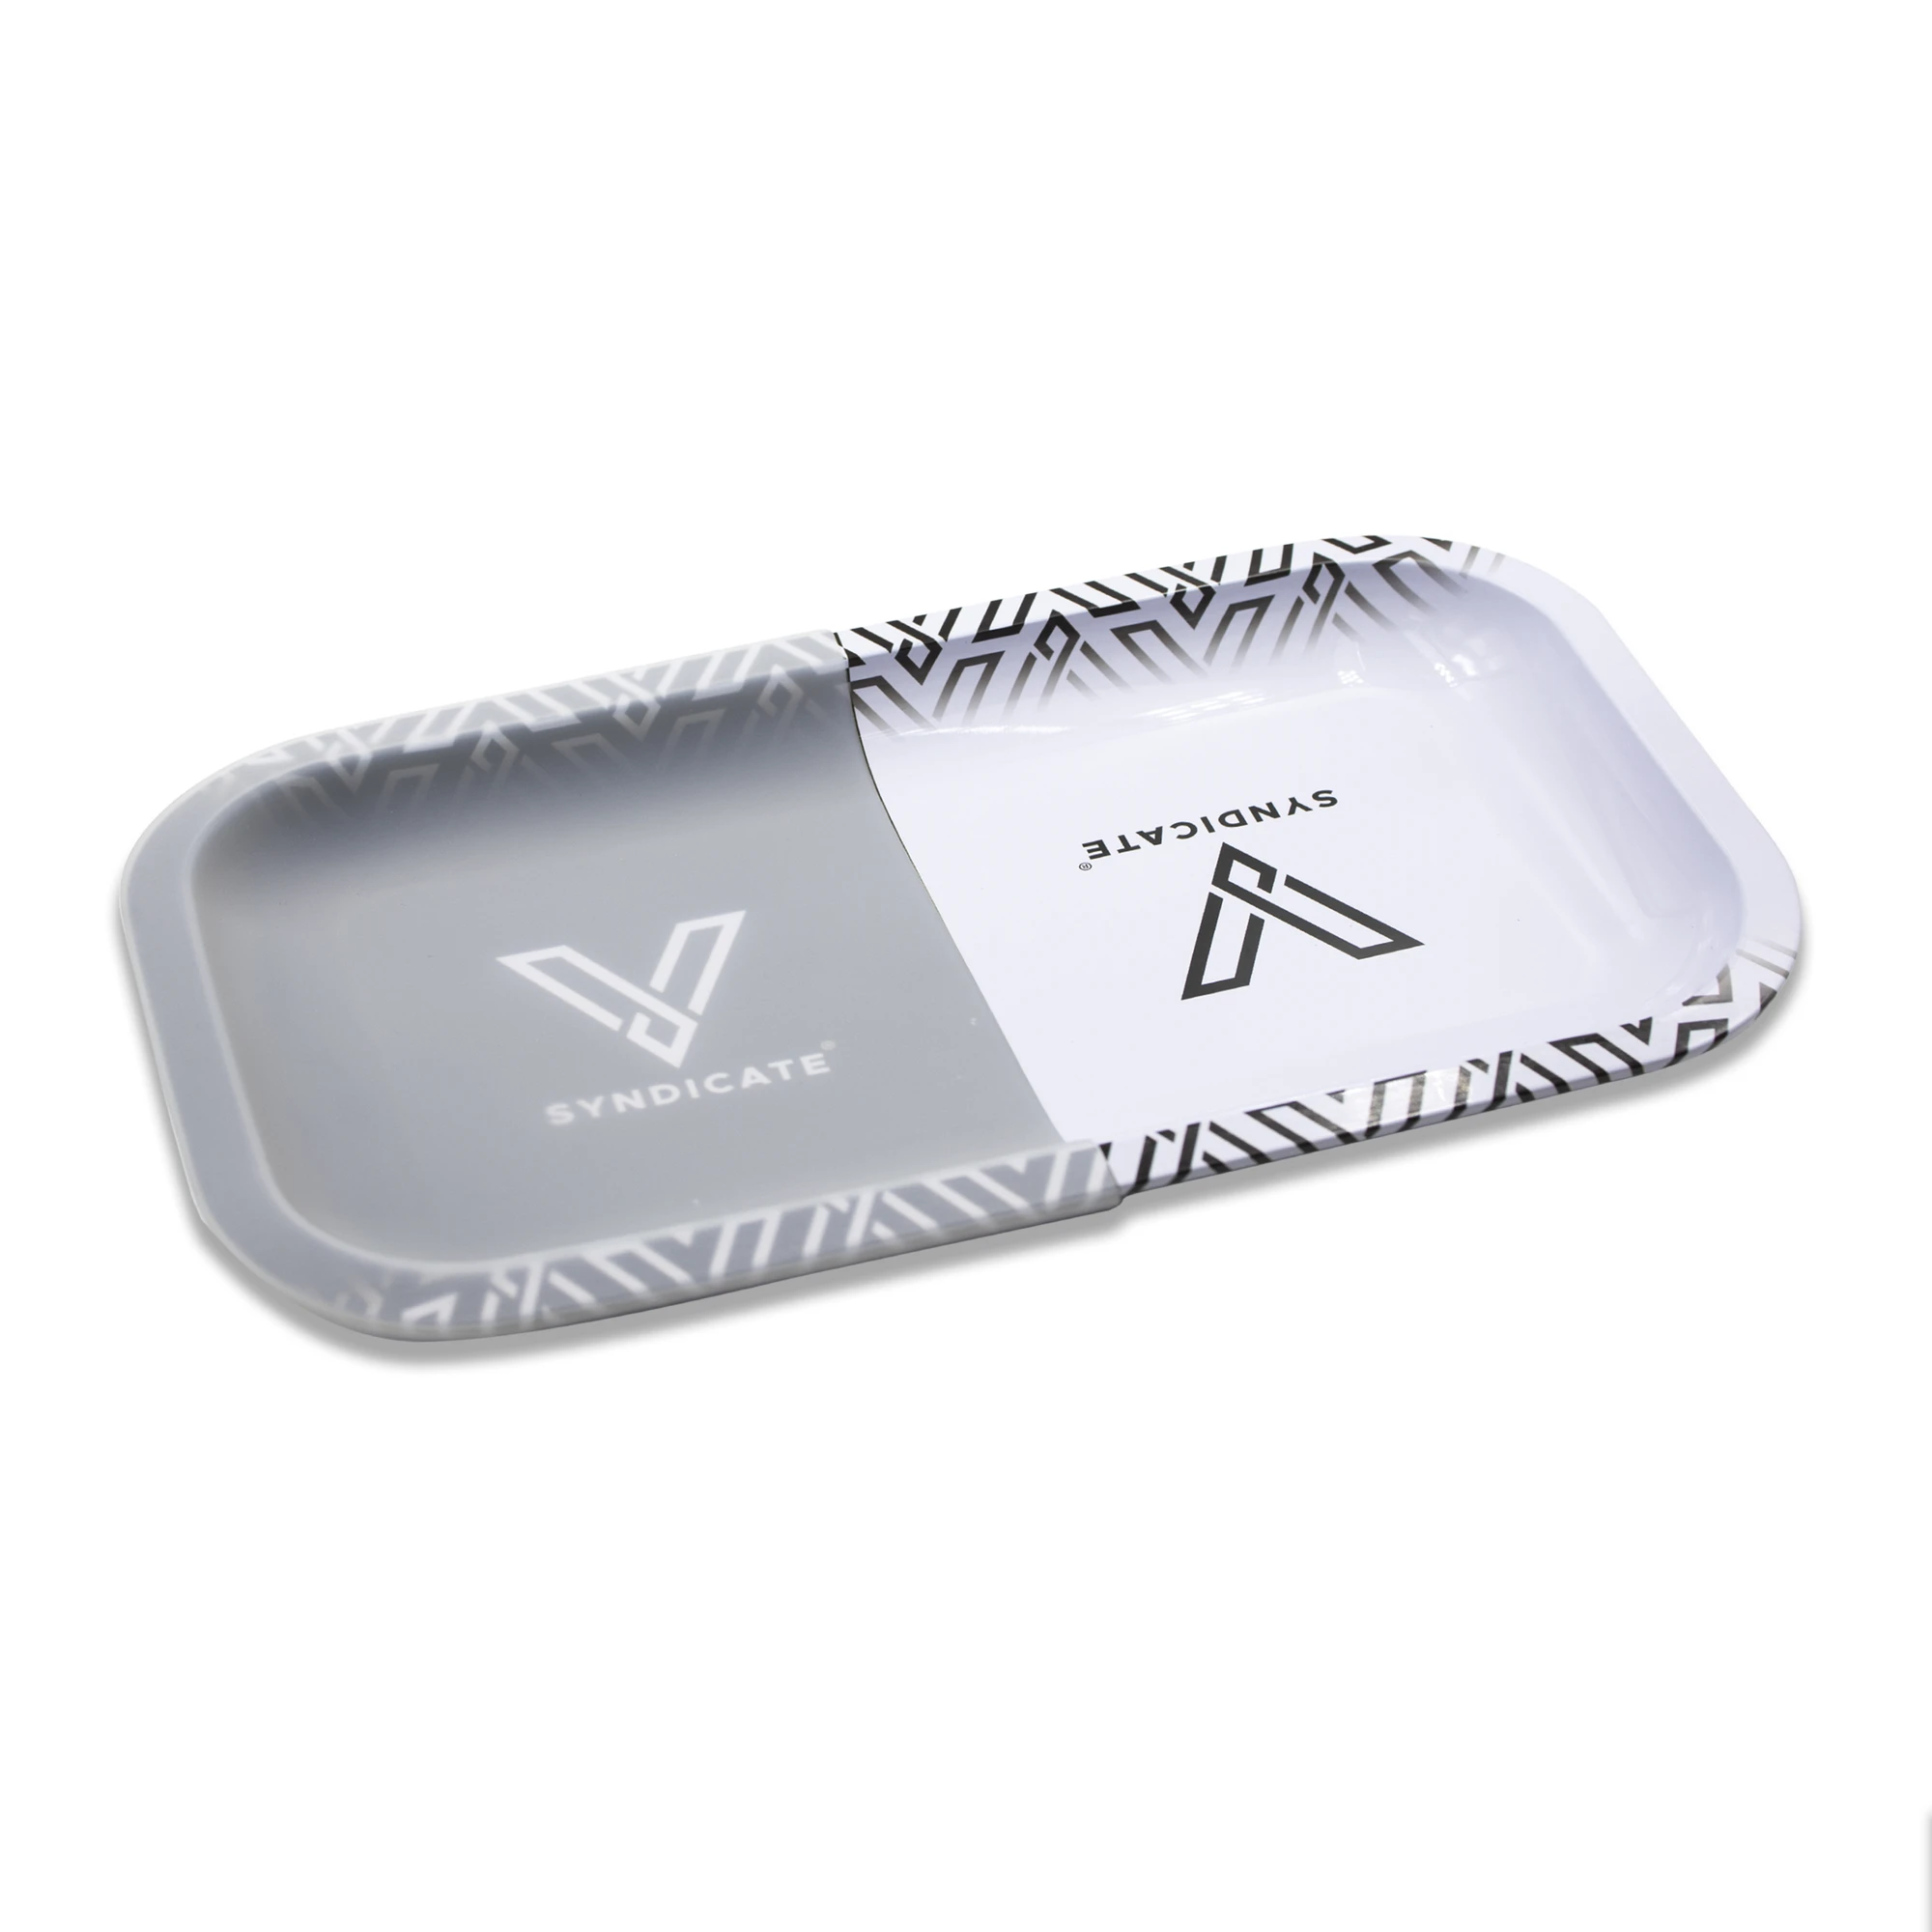 v syndicate hybrid rolling tray silicone mat